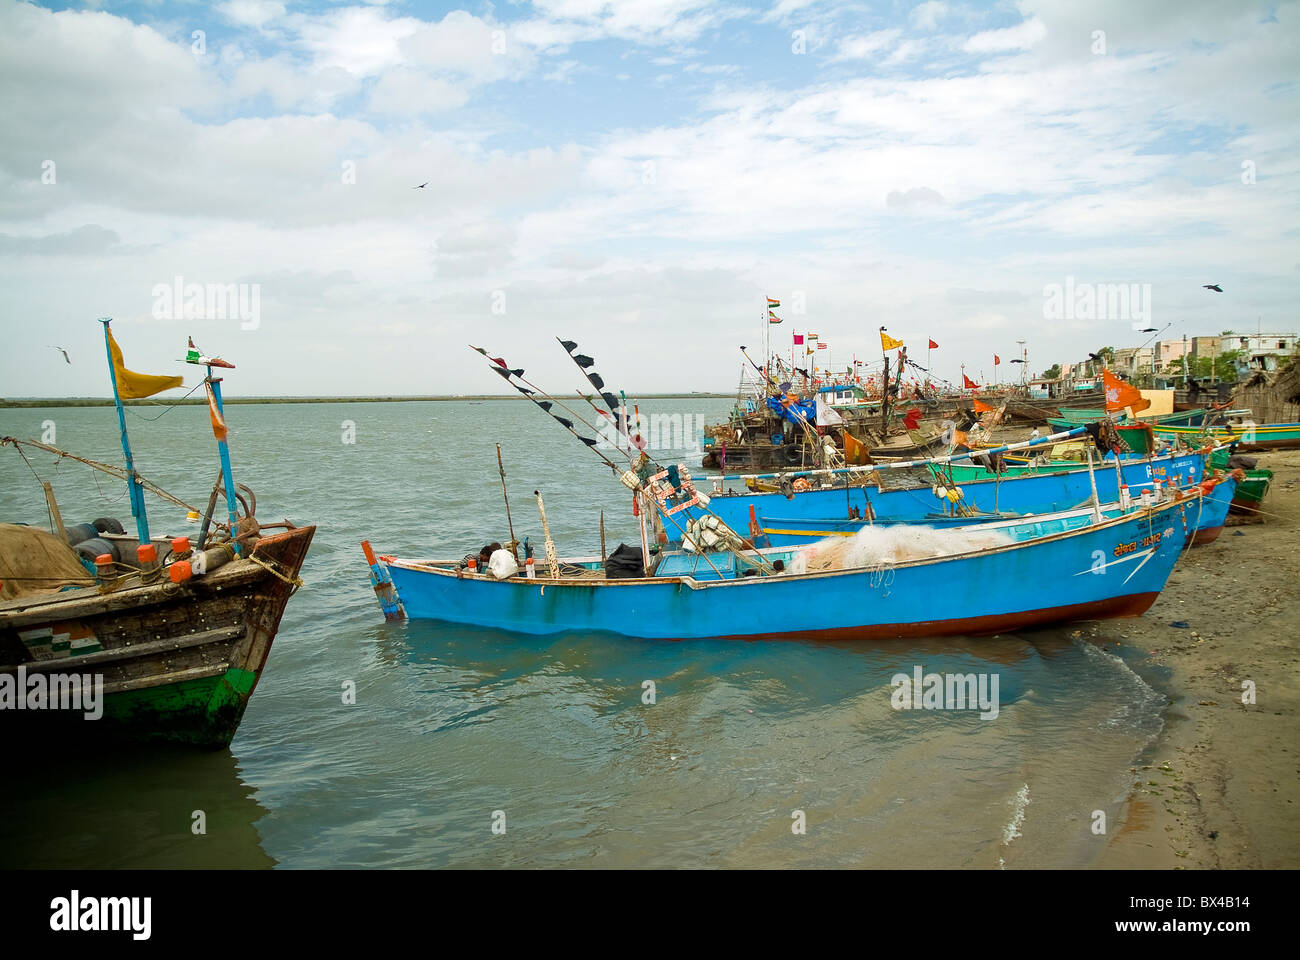 Fishing boats in a small fishing village on the Island of Diu, India Stock Photo